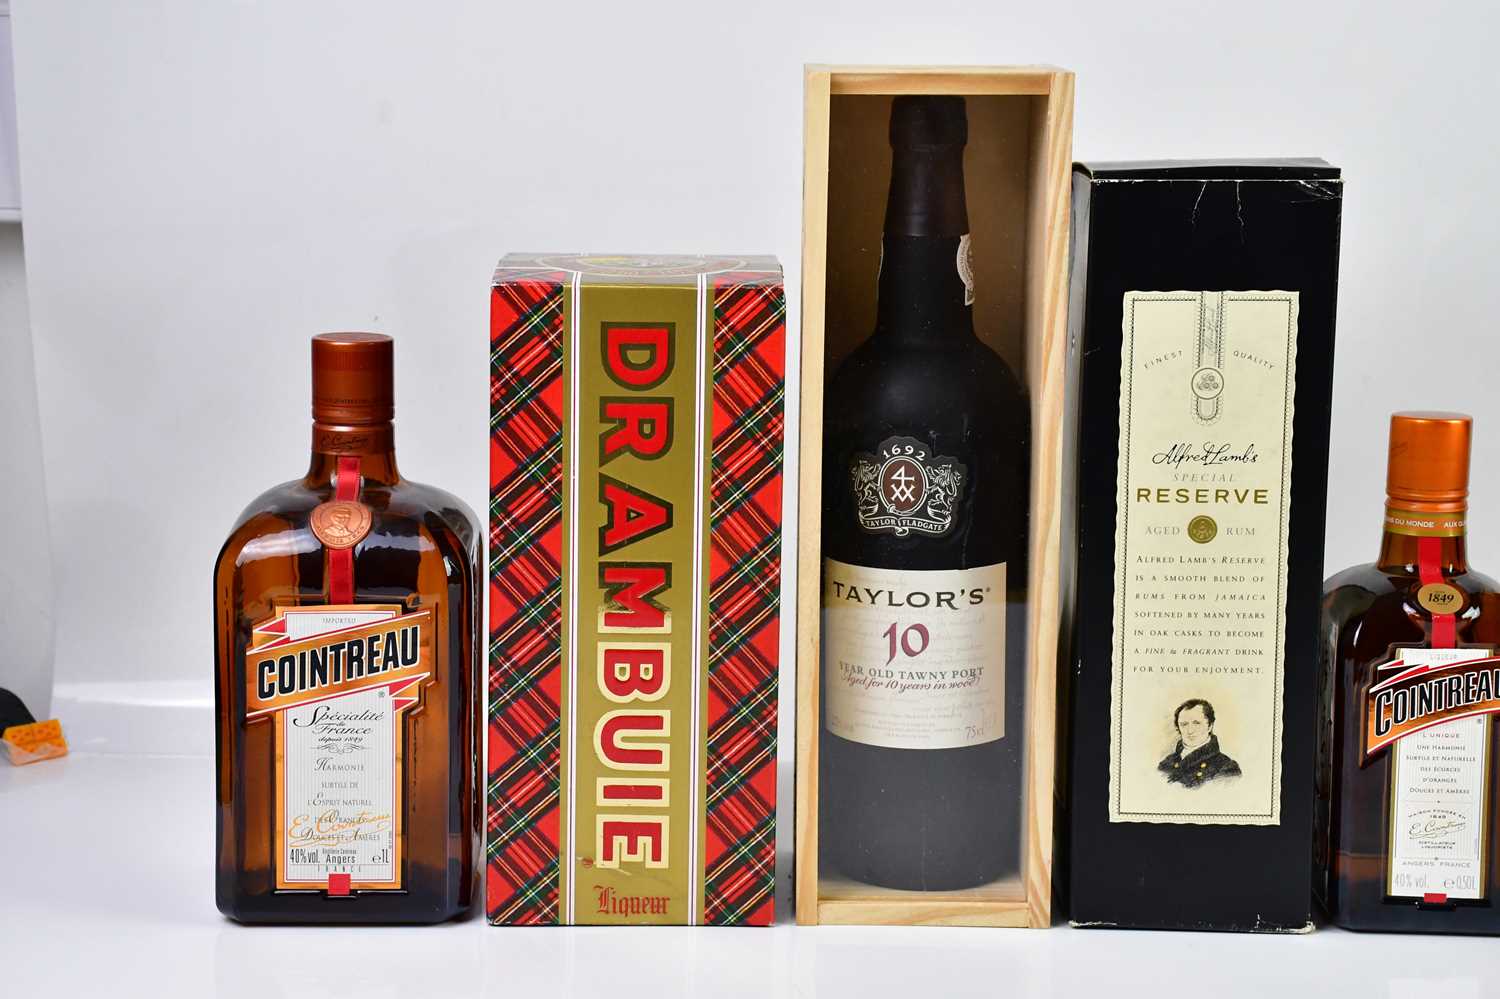 MIXED SPIRITS; a collection of mixed spirits including three bottles of Cointreau, a bottle of - Image 2 of 3